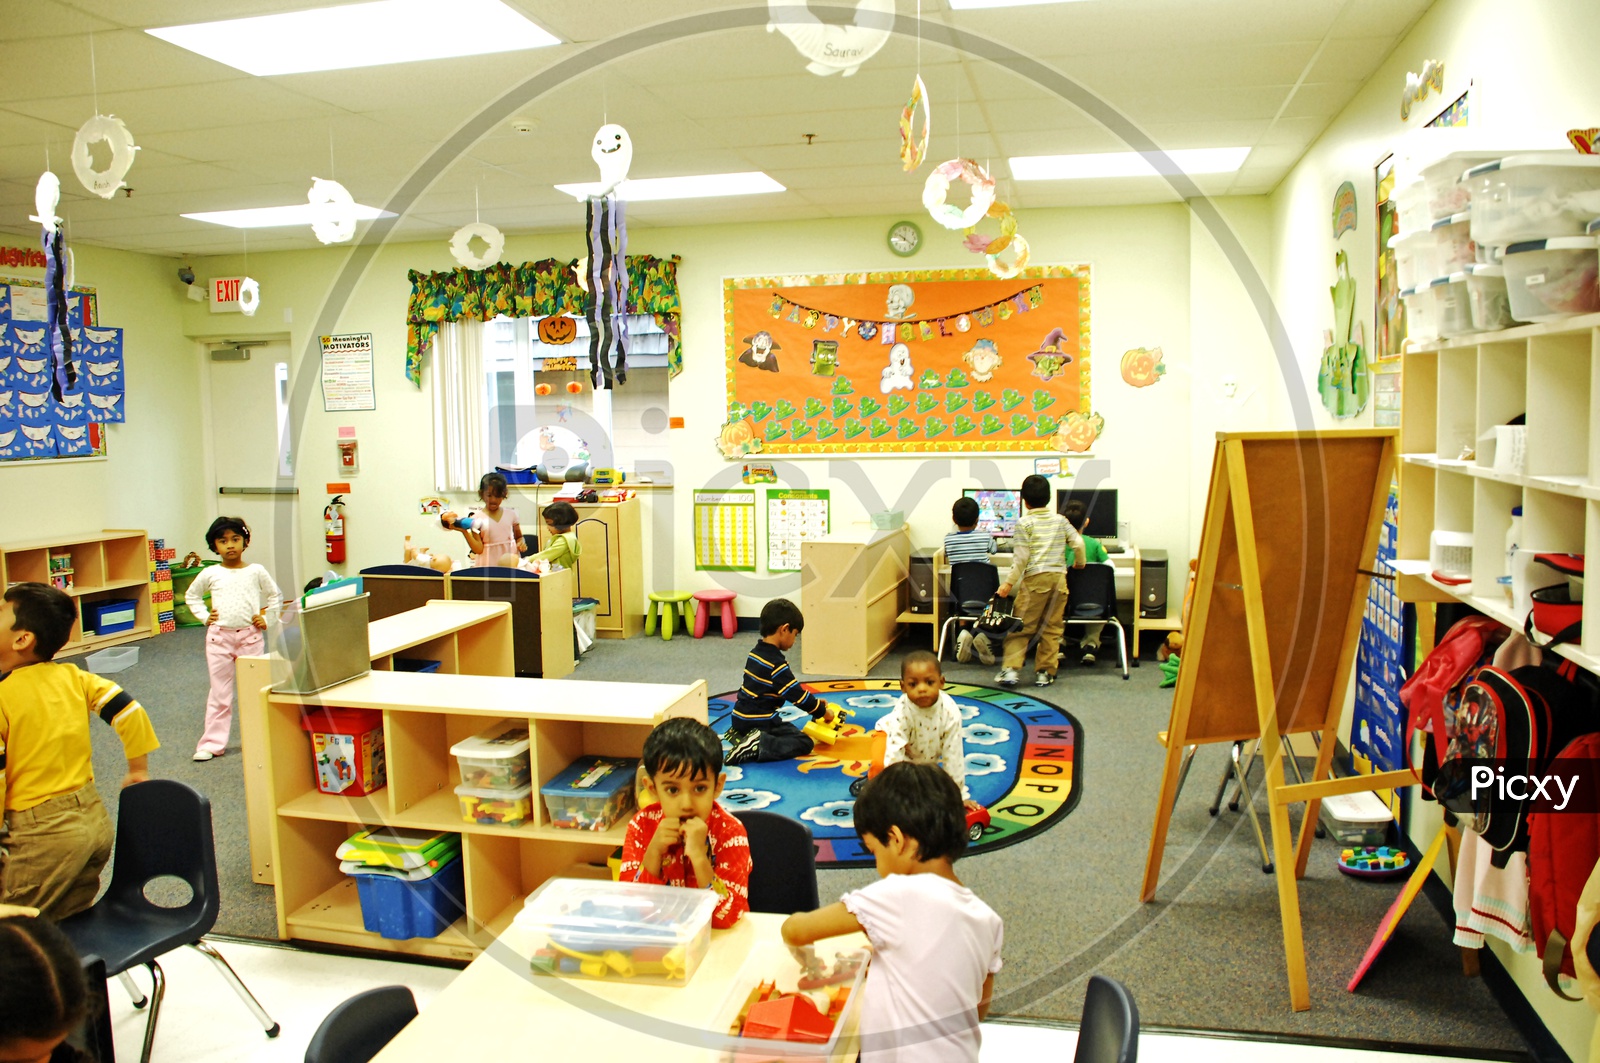 Toddlers playing in the classroom